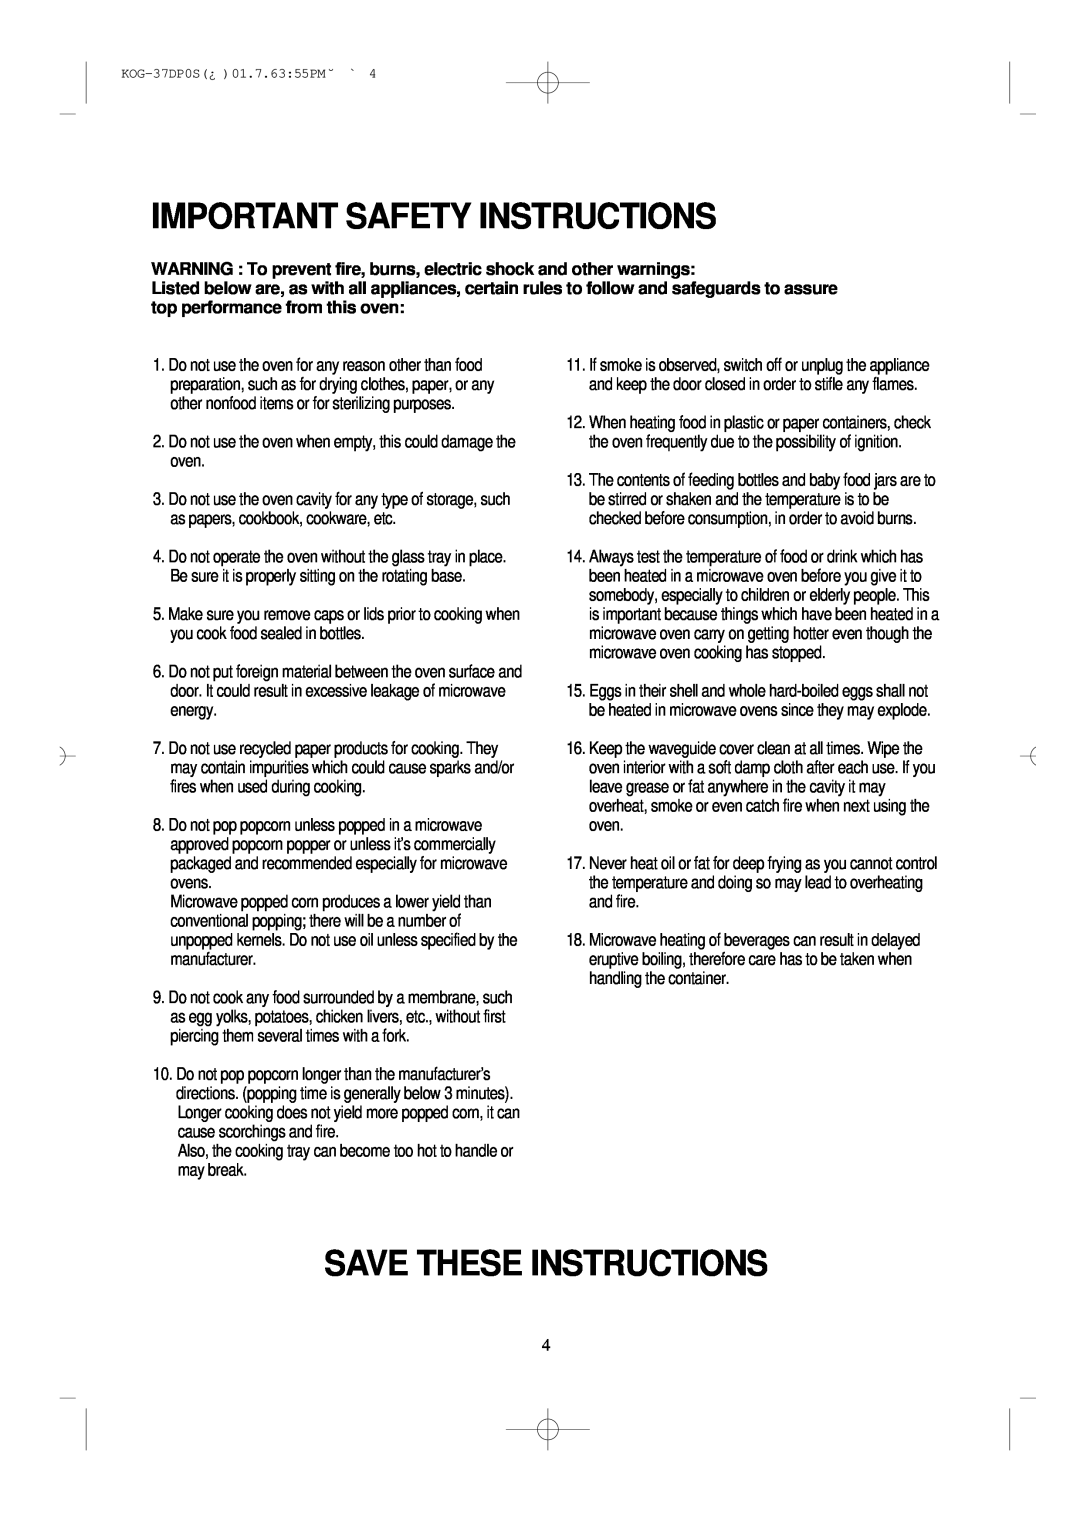 Daewoo KOG-37DP0S manual Important Safety Instructions, Save These Instructions 